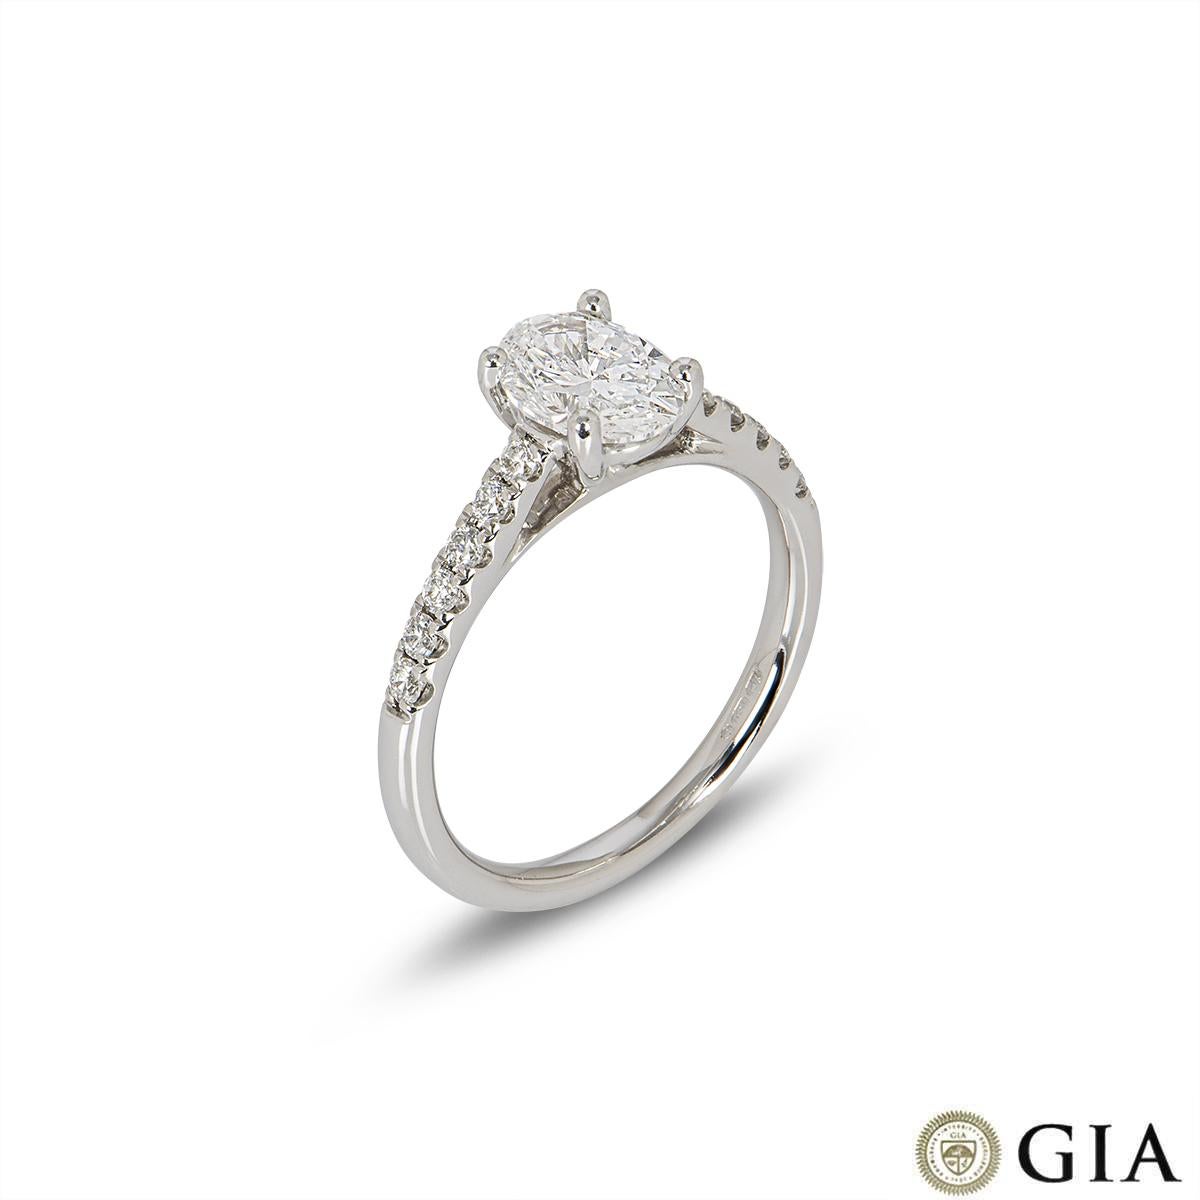 A stunning 18k white gold diamond engagement ring. The ring is set to the centre with an oval cut diamond weighing 1.00ct, D colour and SI1 clarity. The centre diamond is further complemented with 12 round brilliant cut diamonds set to the shoulders